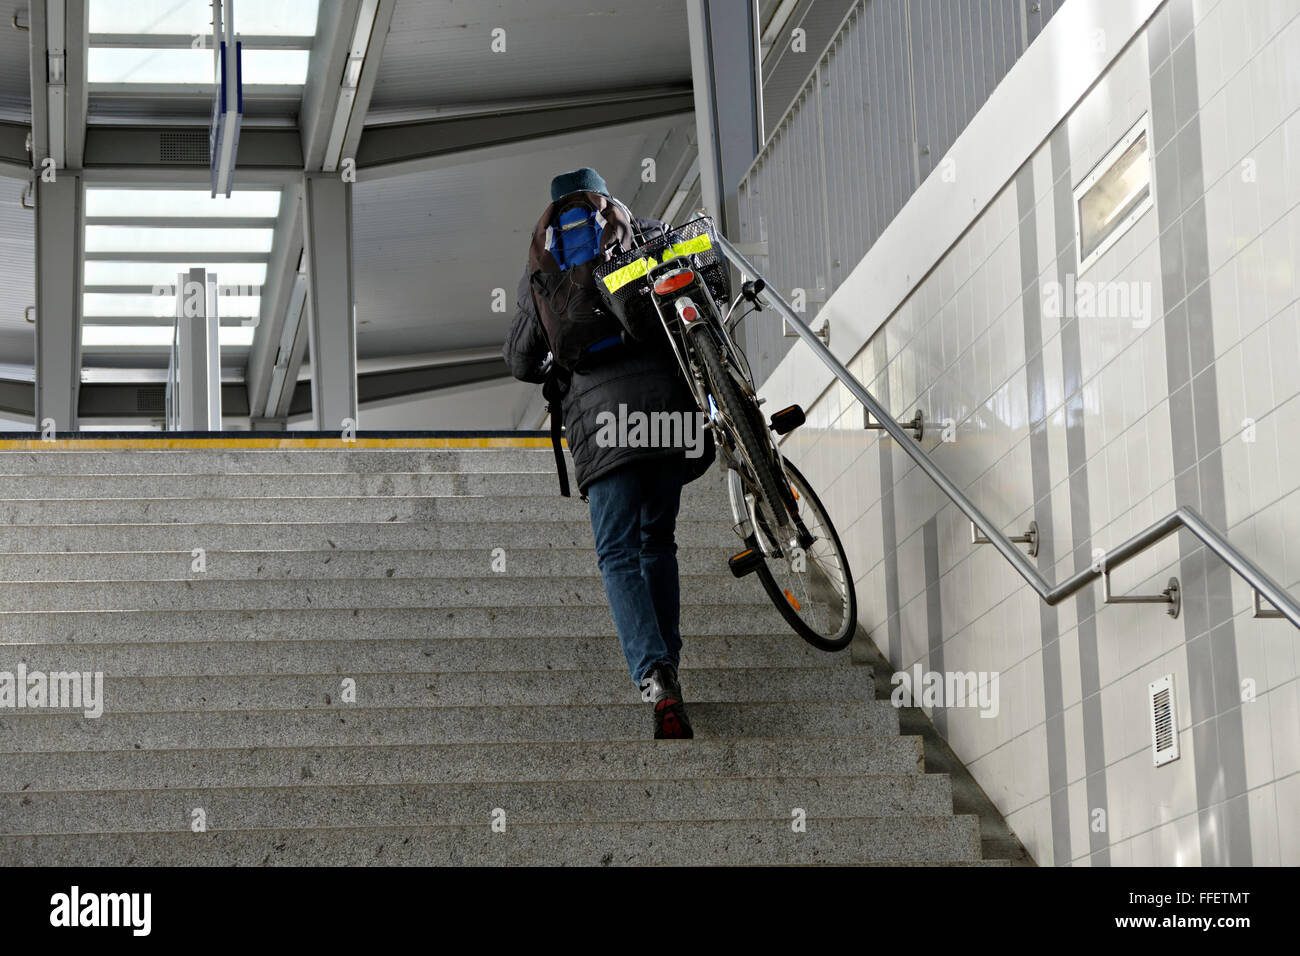 Man carrying bicycle up the stairs, Rosenheim railway station, Upper Bavaria, Germany, Europe. Stock Photo